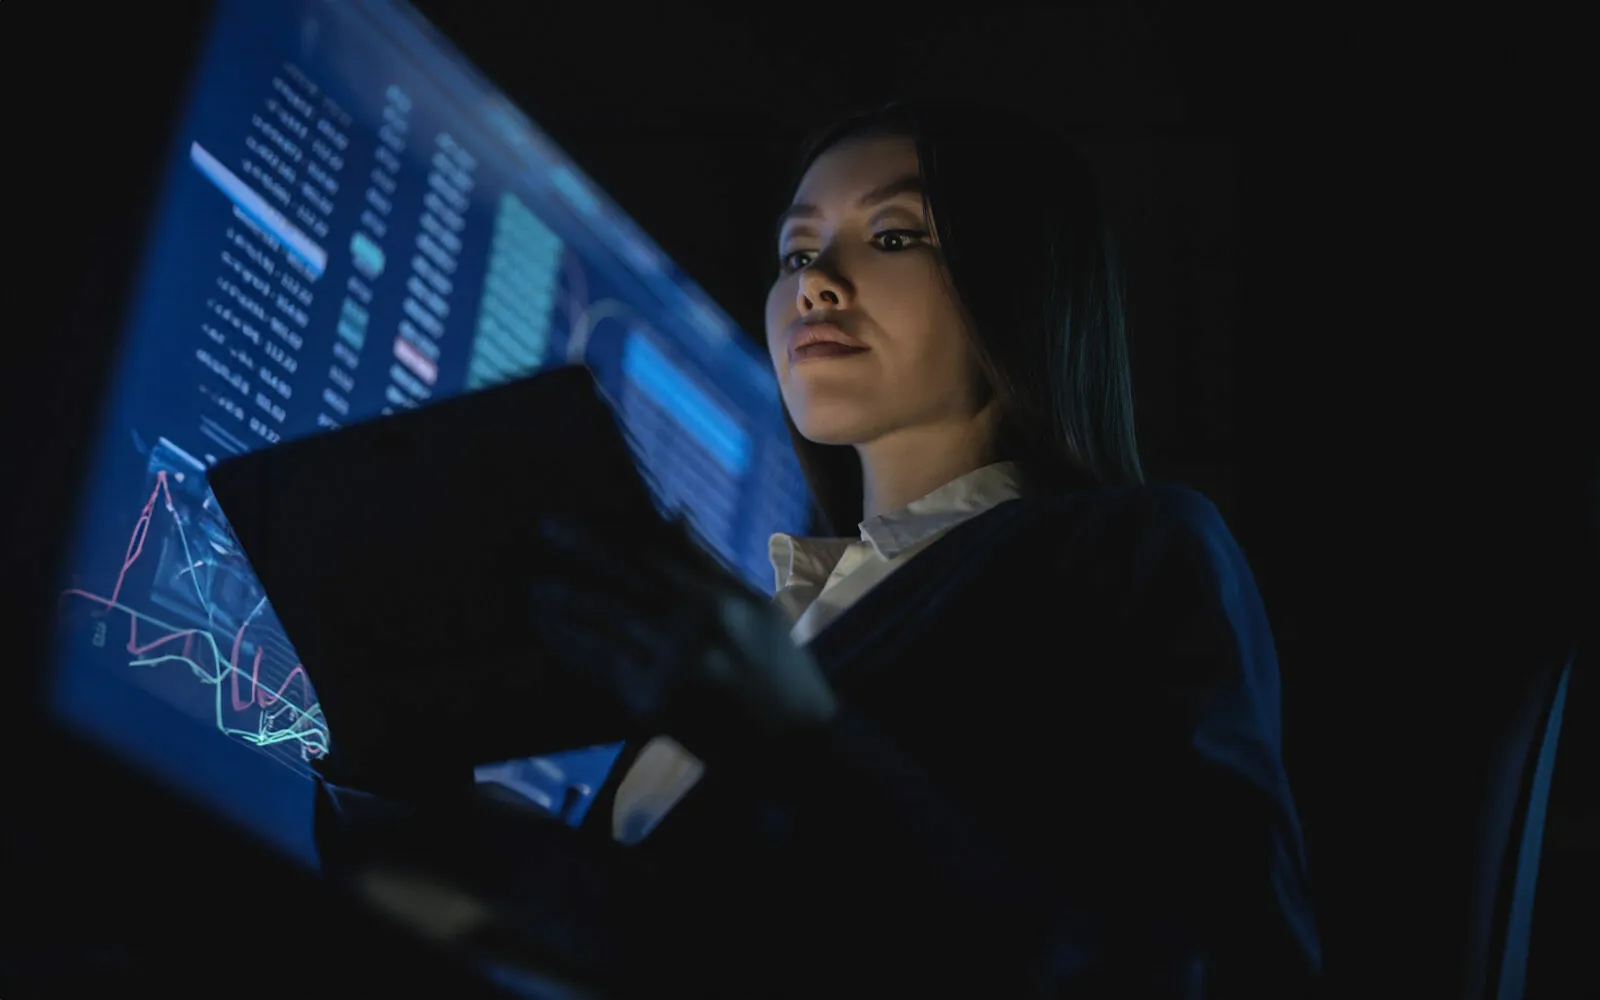 A business woman holding tablet in the dark office